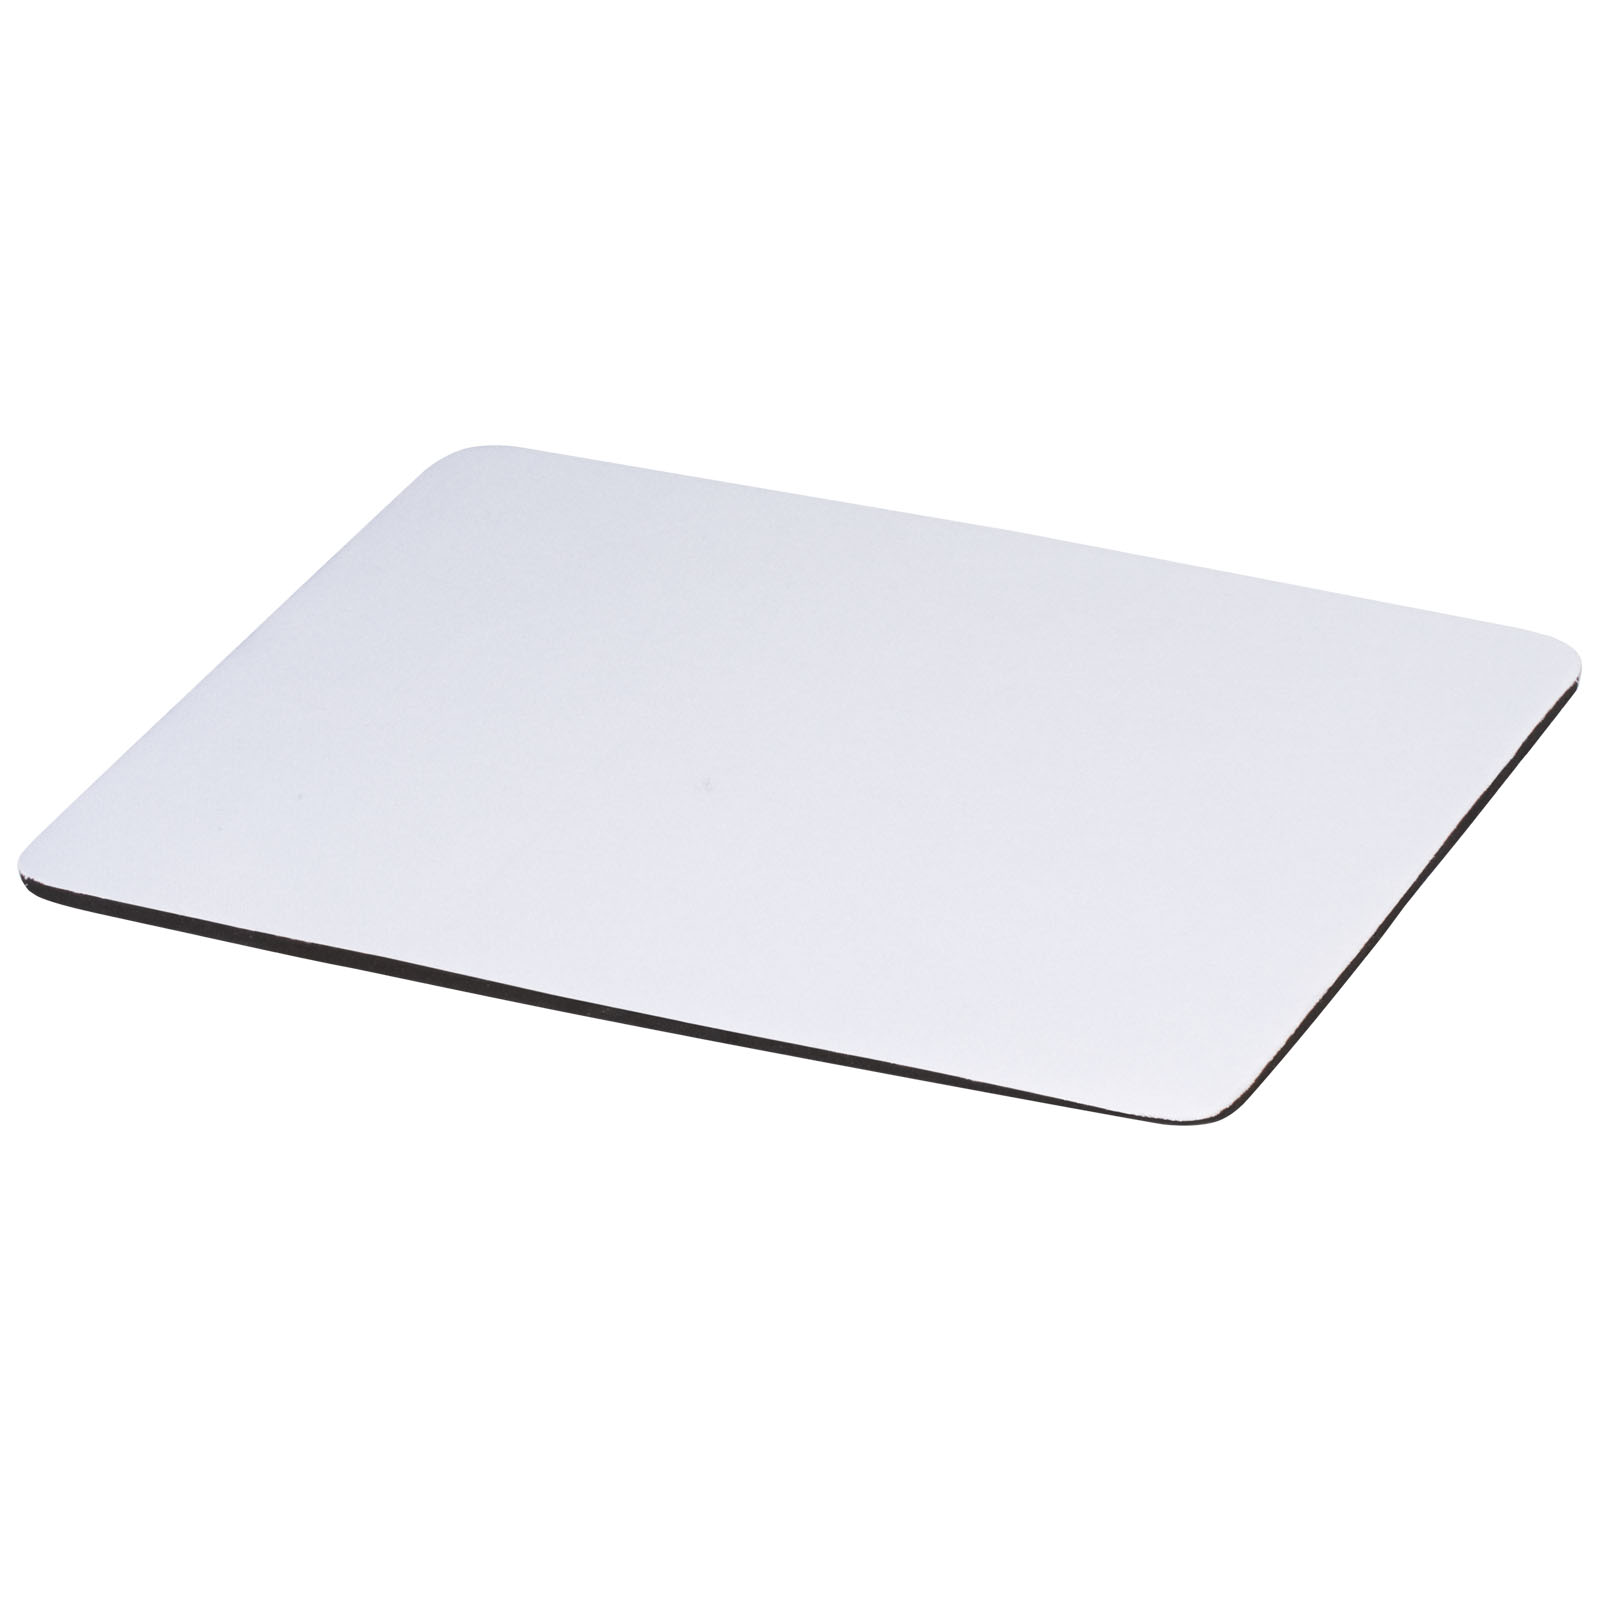 Advertising Computer Accessories - Pure mouse pad with antibacterial additive